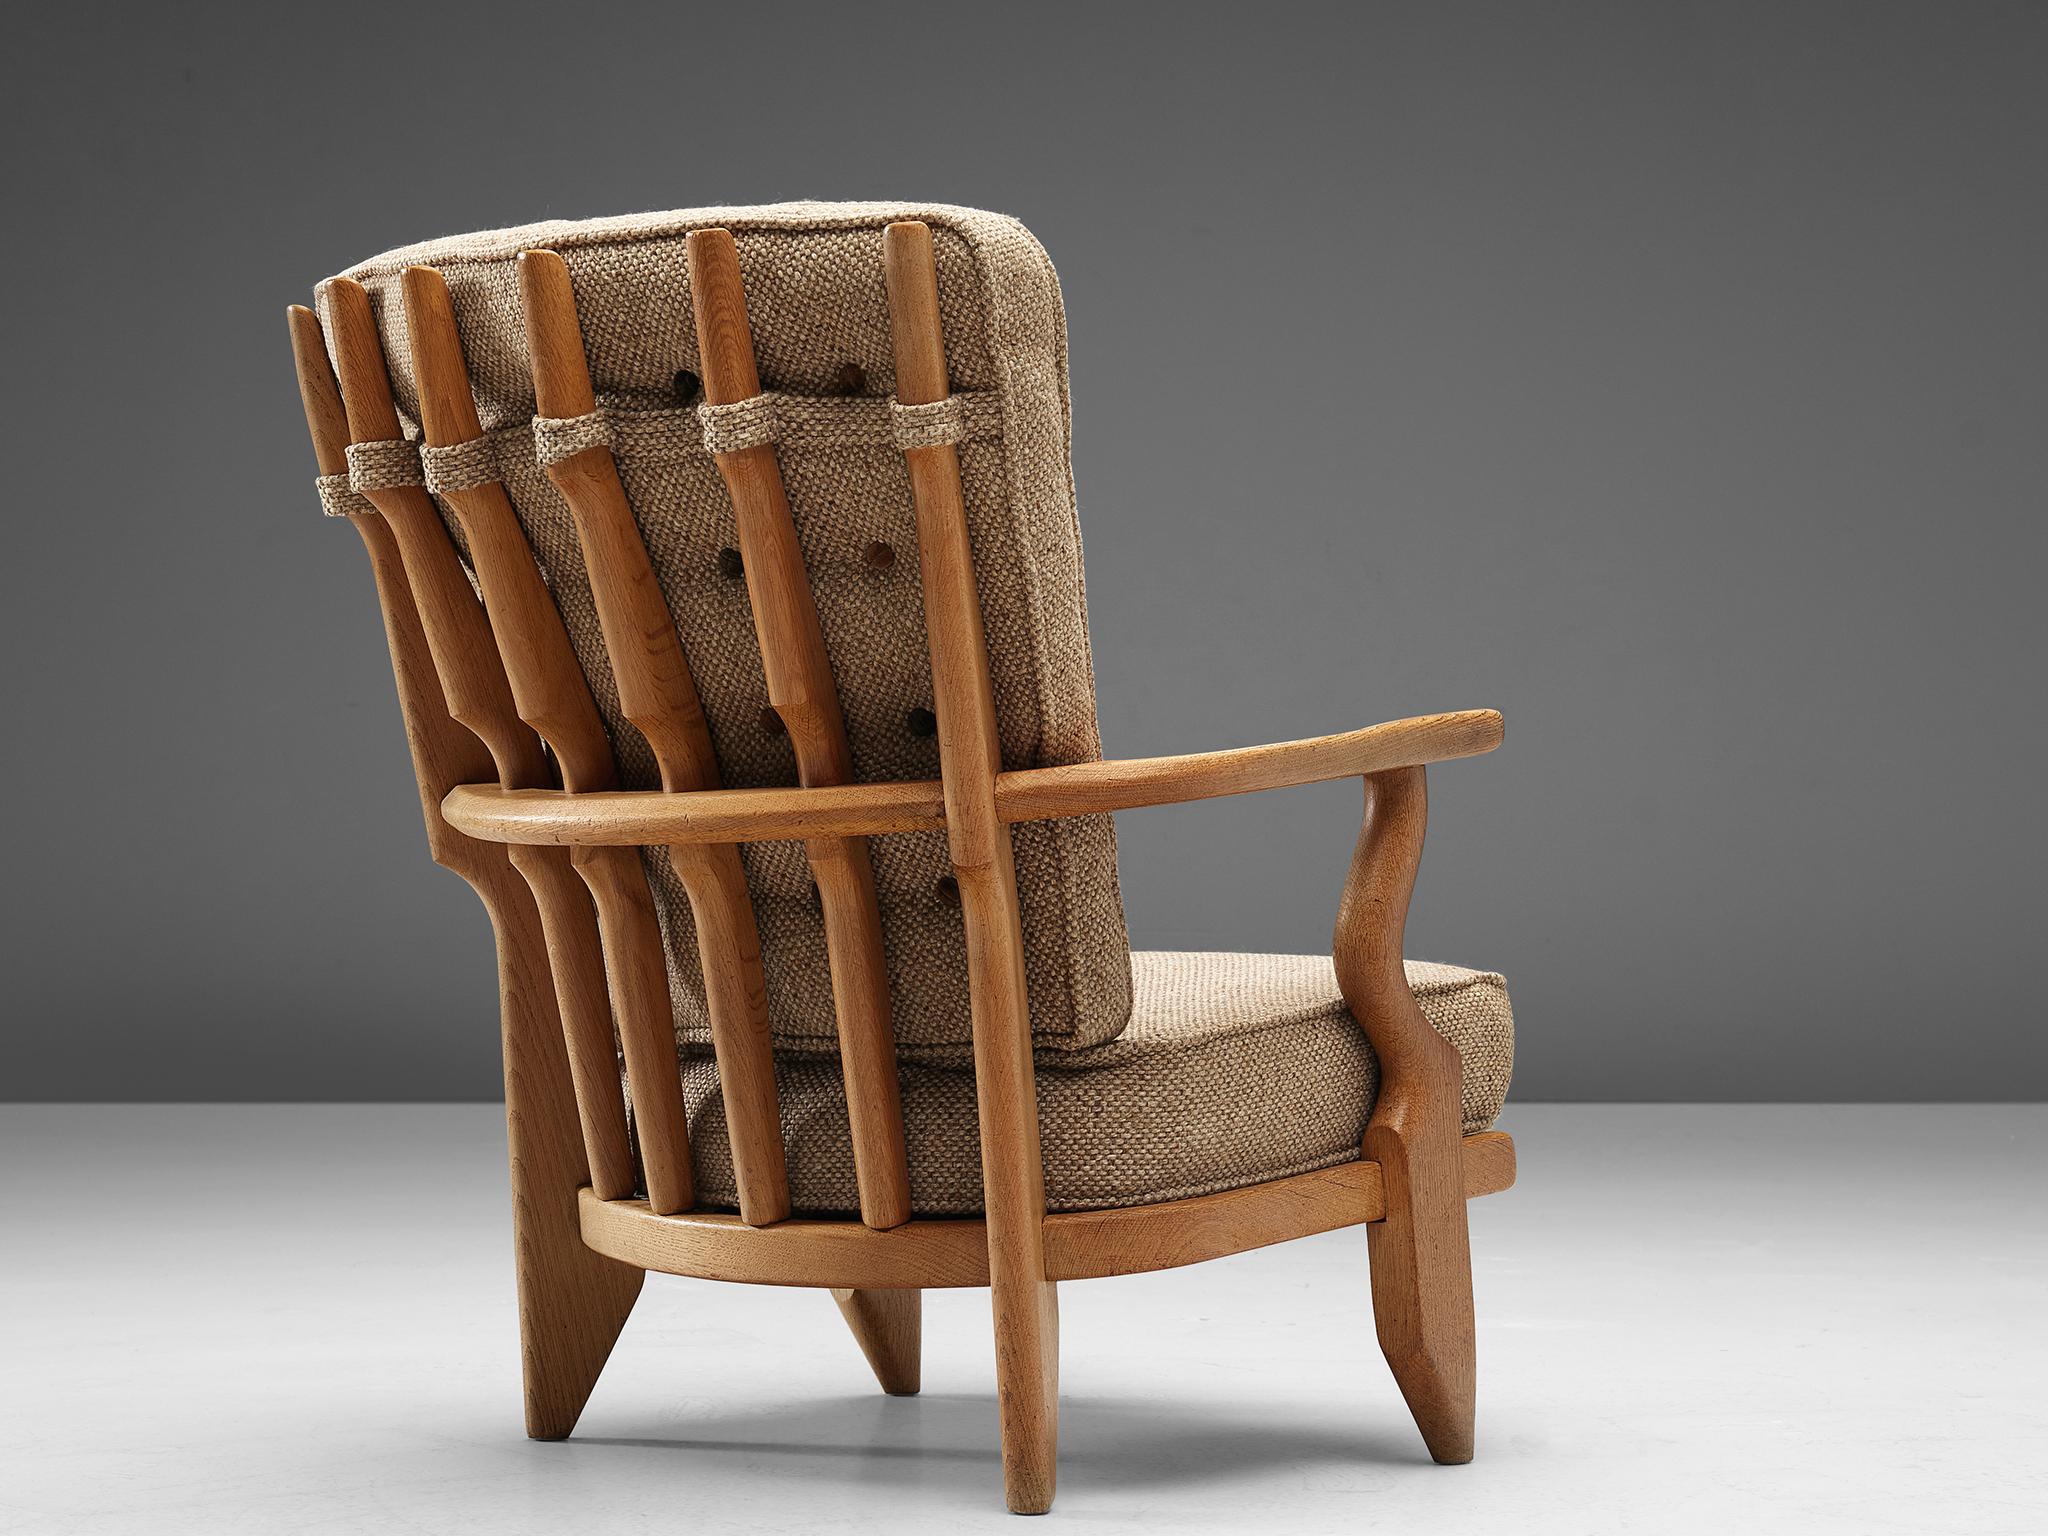 Guillerme et Chambron, lounge chair, oak and beige upholstery, France, 1960s.

Well sculpted Guillerme and Chambron 'Mid Repos' lounge chair, in solid oak with the typical characteristic decorative details at the back and capricious forms of the